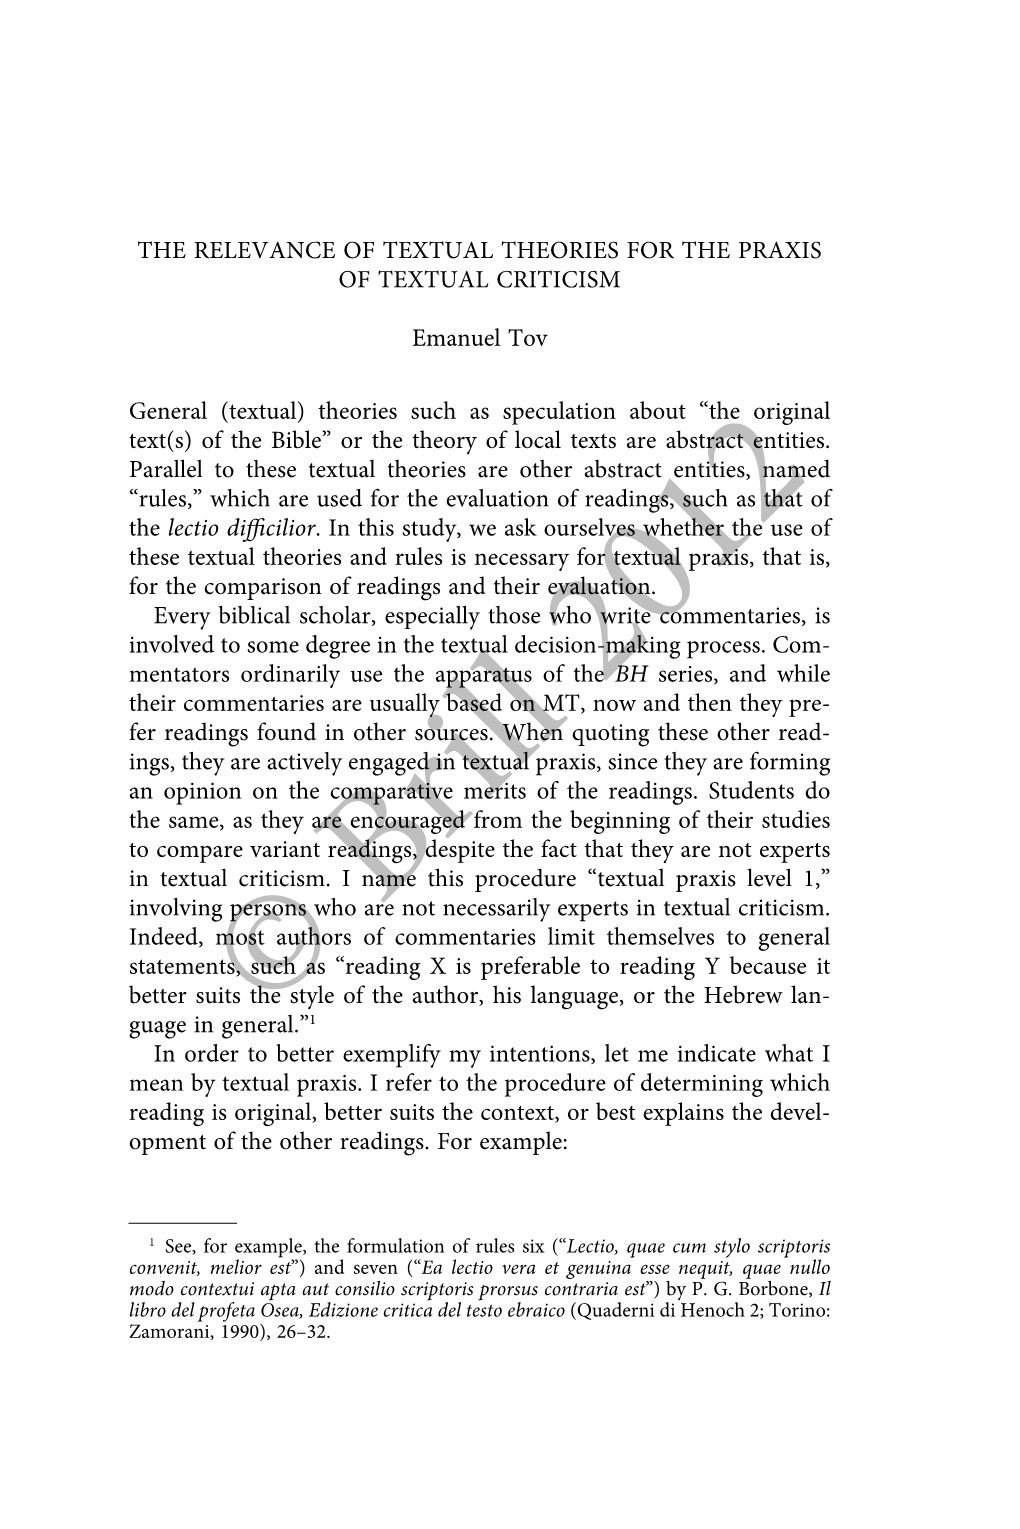 Textual Theories for the Praxis of Textual Criticism